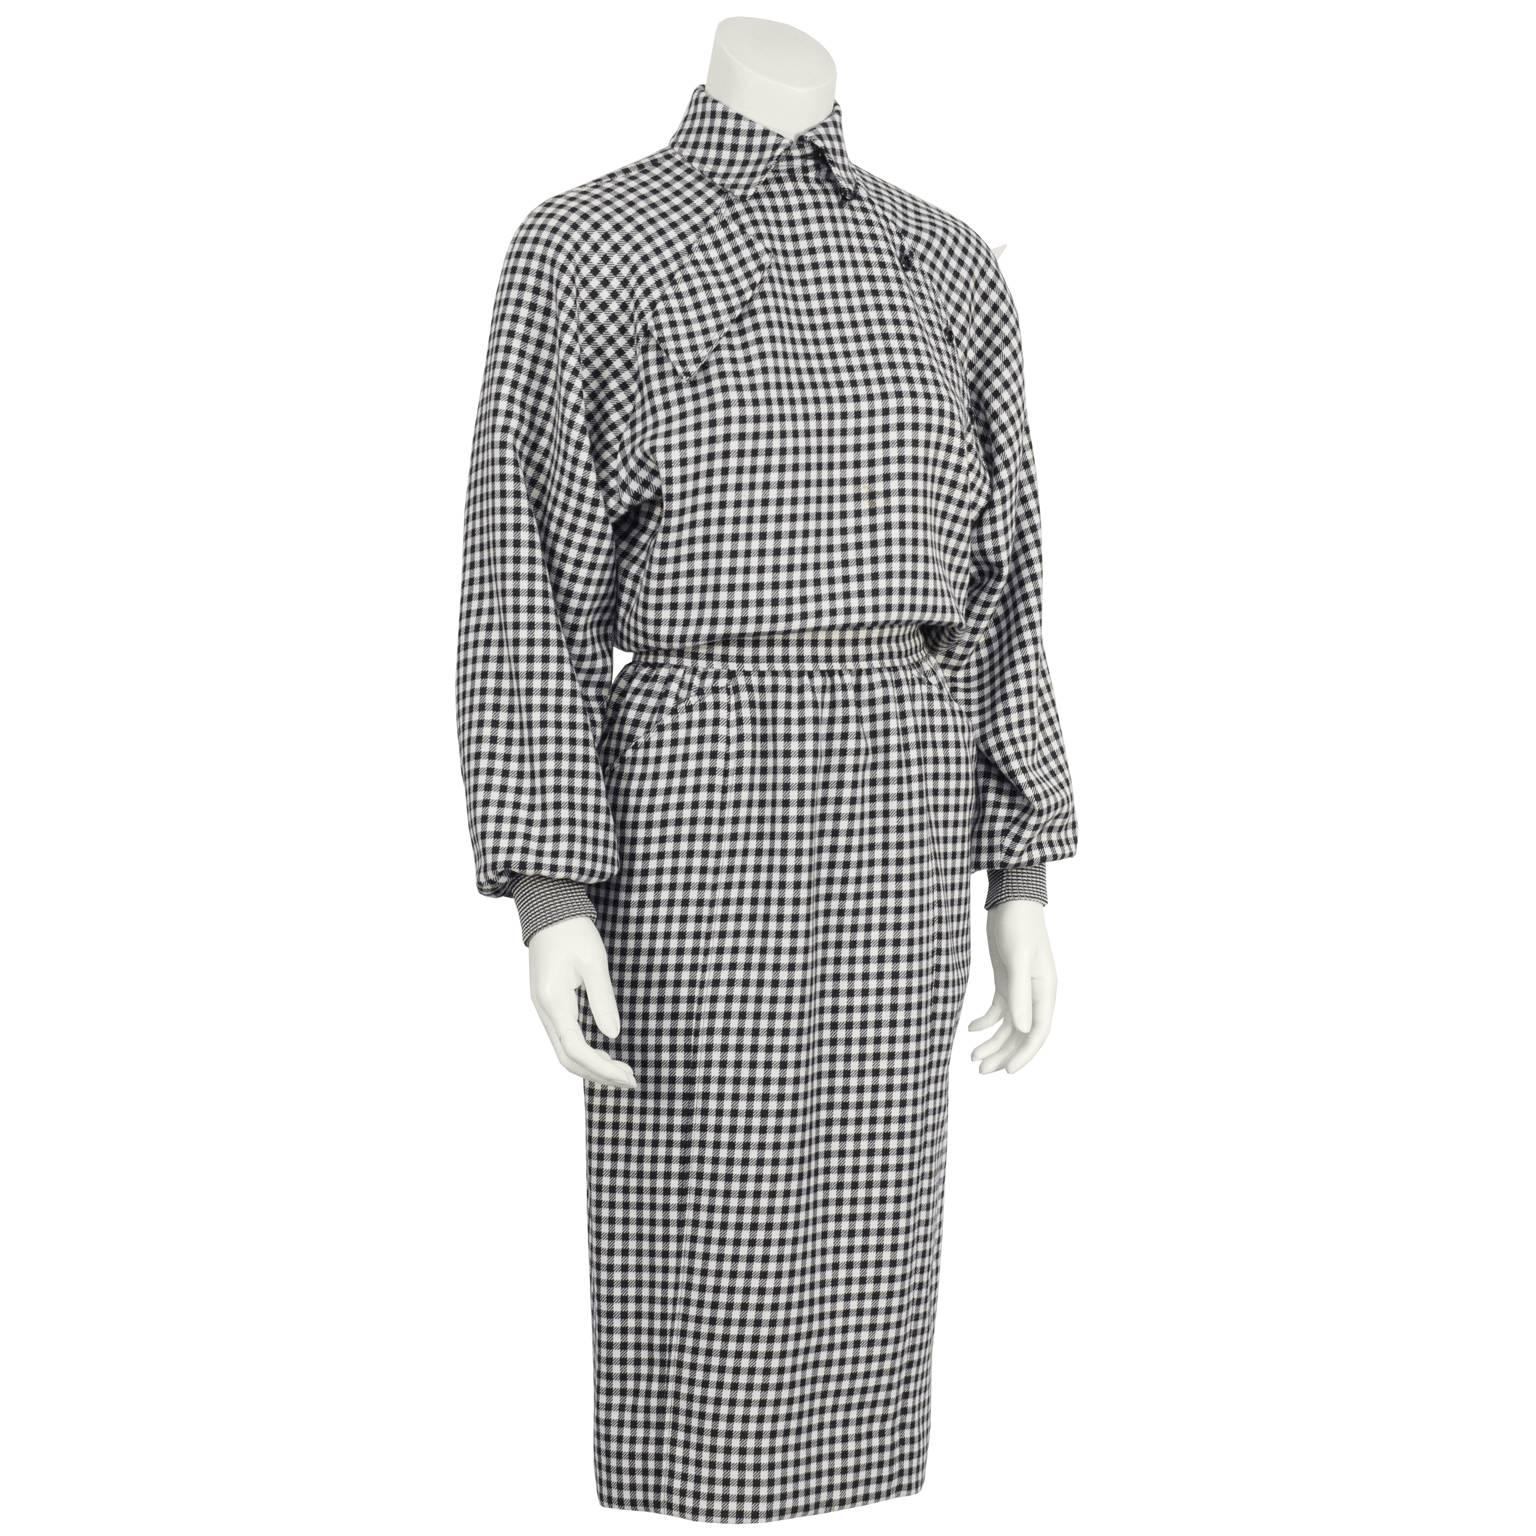 Ungaro wool blend black and white houndstooth dress from the 1980’s. Styled with an asymmetrical button-up neckline with a faux flap pocket on the opposite breast. Batwing sleeves are finished with ribbed knit cuffs. The pencil style skirt has